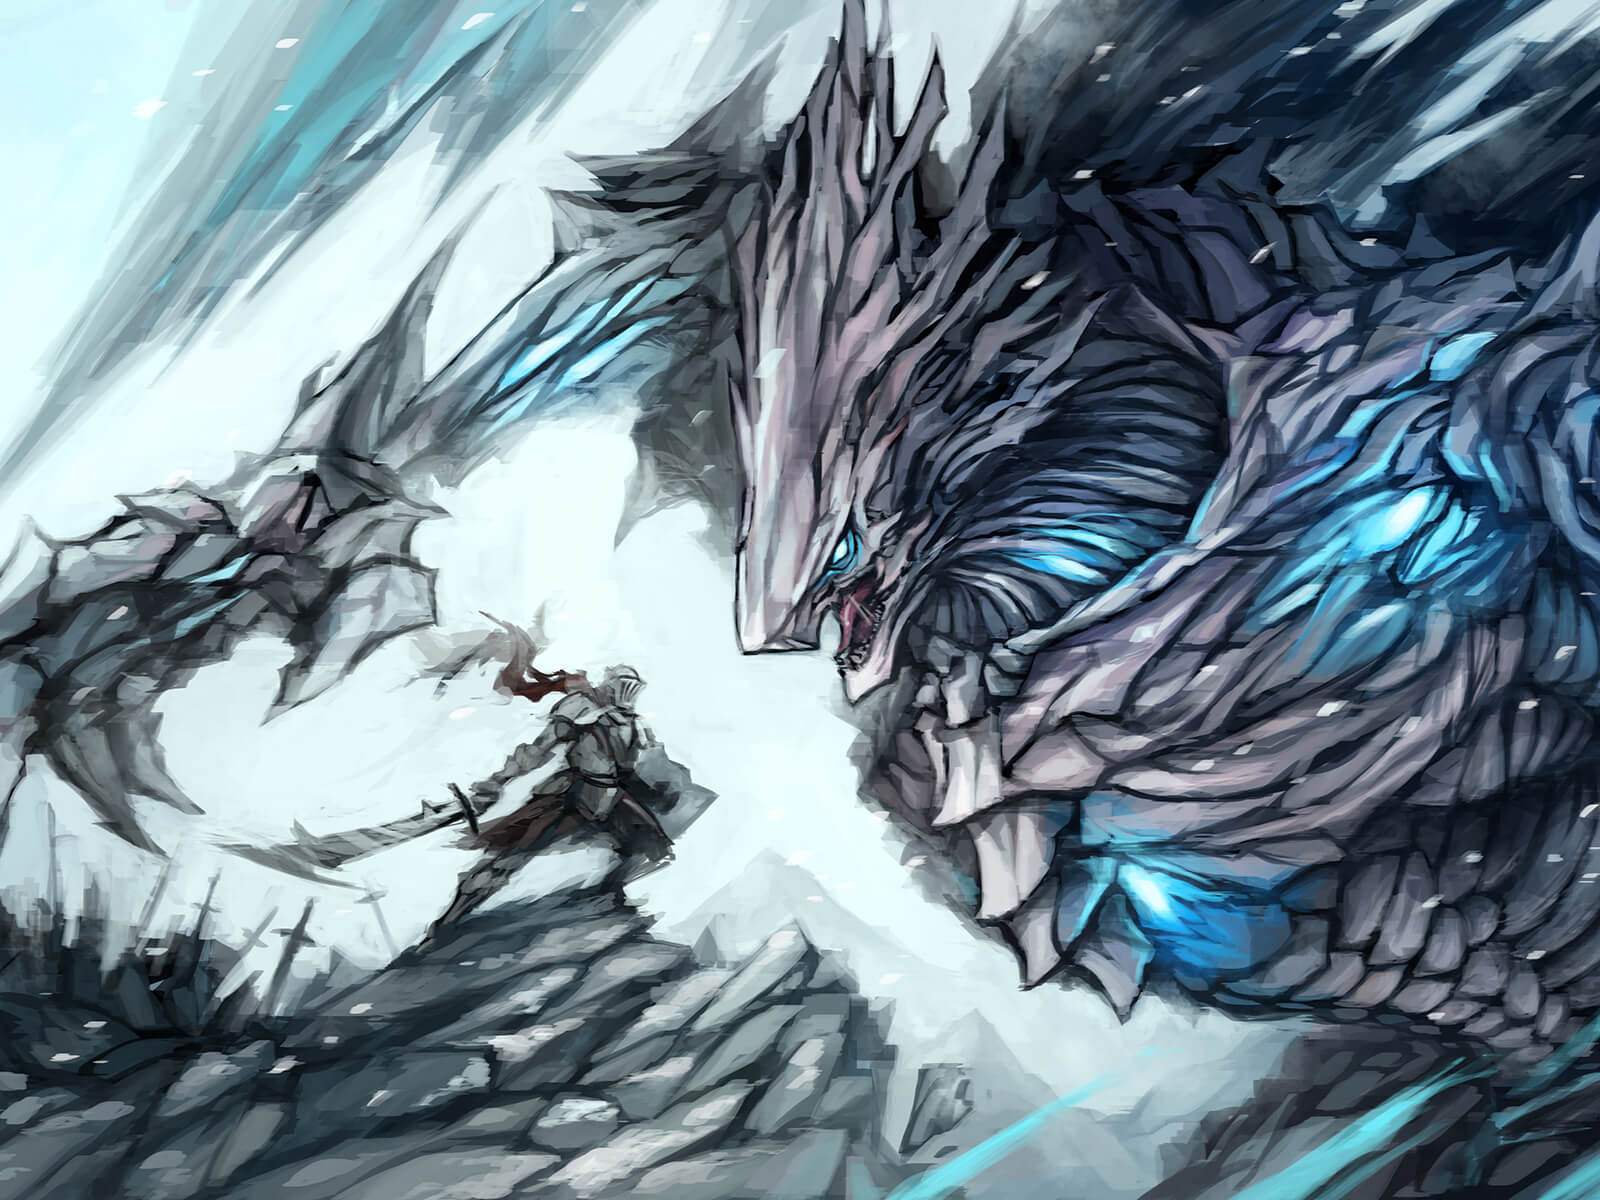 A knight with a sword and iron armor stands off against a gray, stone-faceted beast with glowing-blue points around its body.